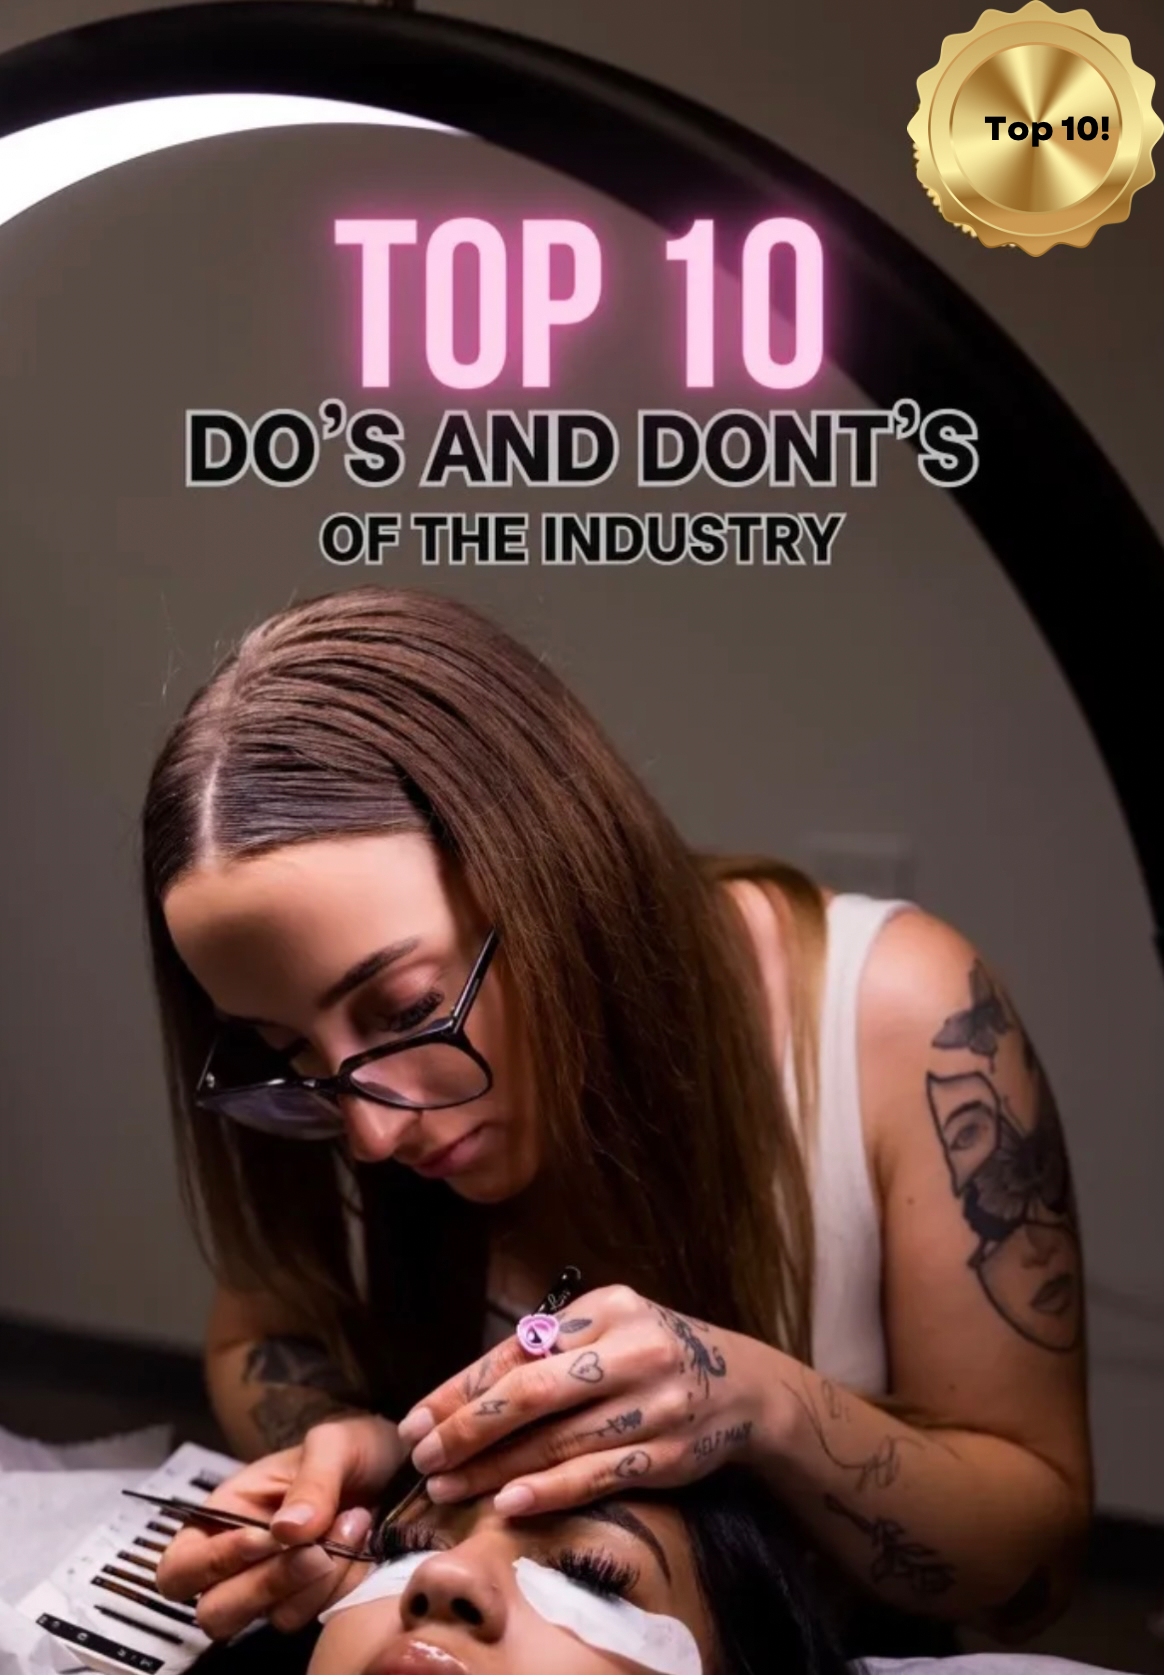 Top 10 Do’s & Dont’s of the beauty industry E-book